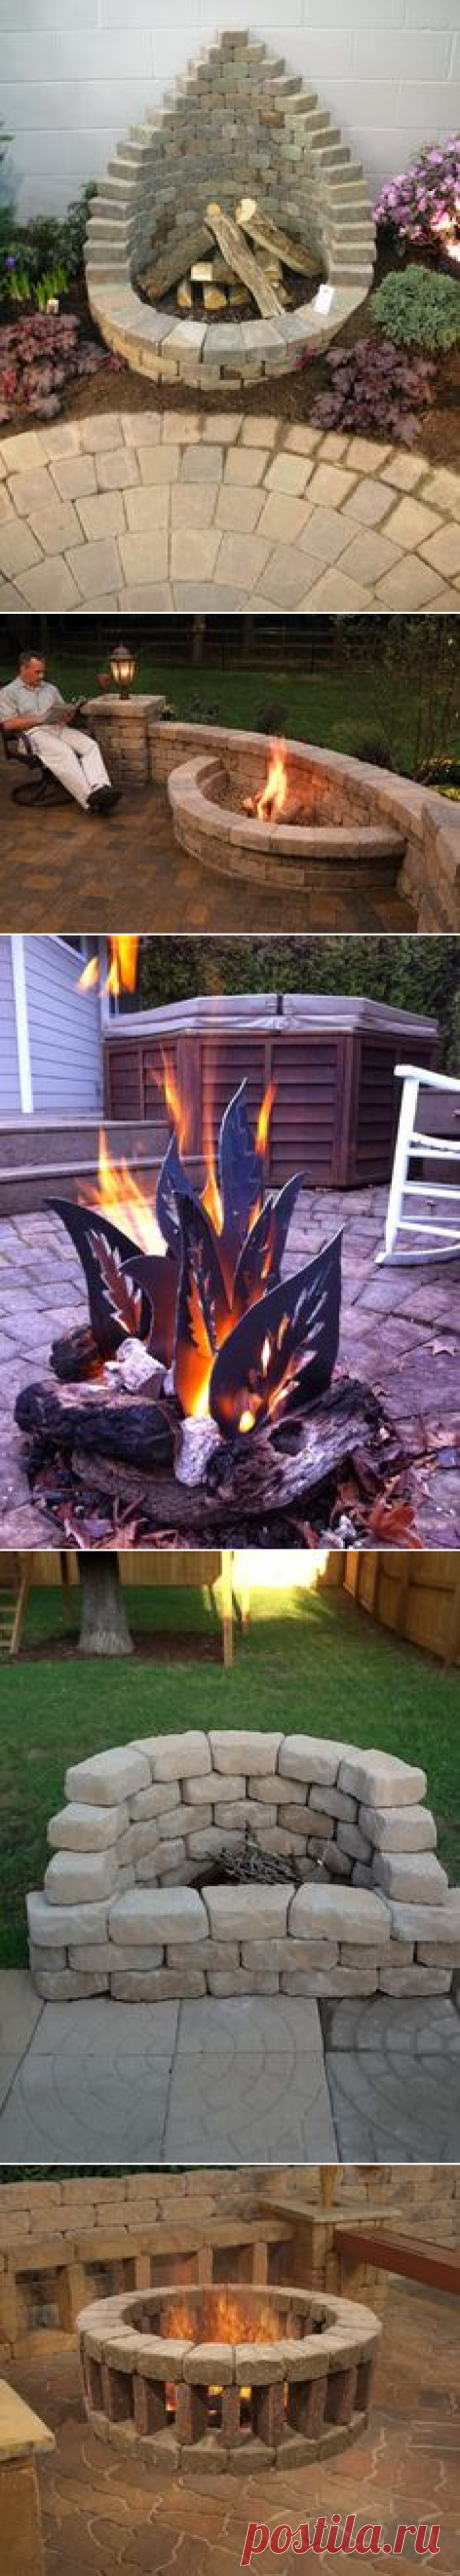 (7) Homemade Fire Pit made from stone overs stacked on a flat service. | Future Home